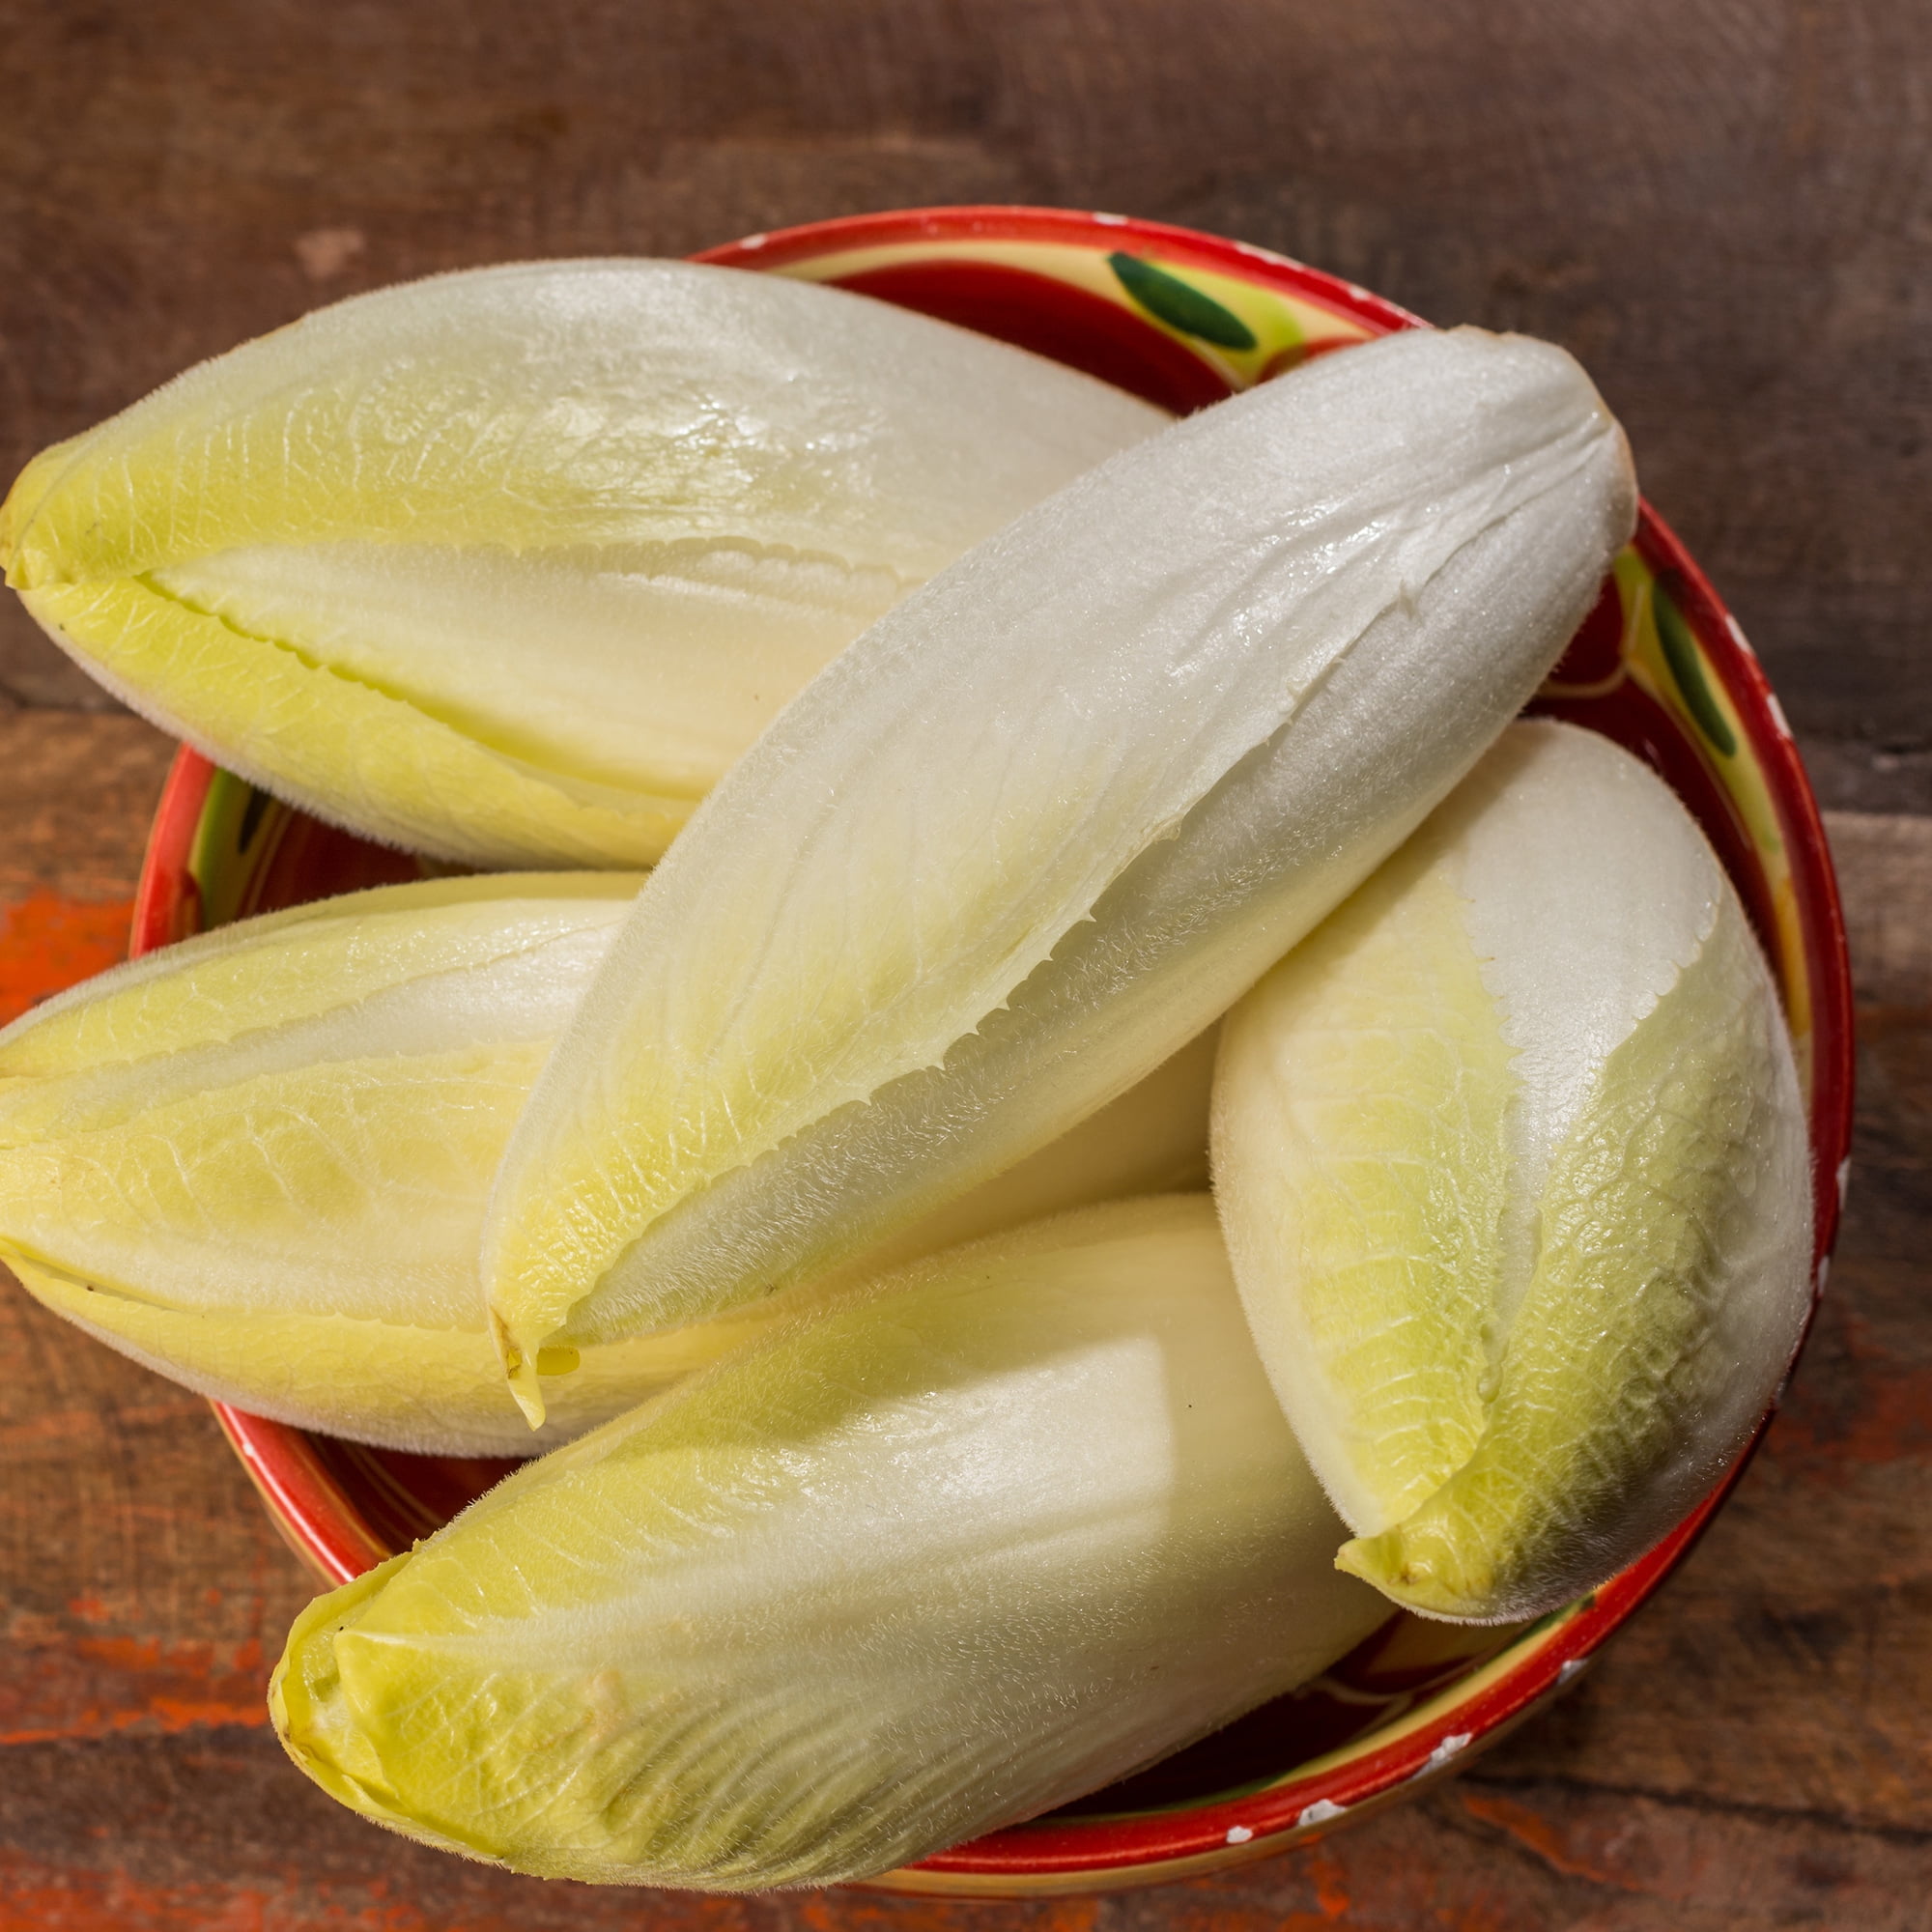 Seeds Endive Lettuce Leaf Yellow-Green Frisee Chicory Planting Heirloom Organic 